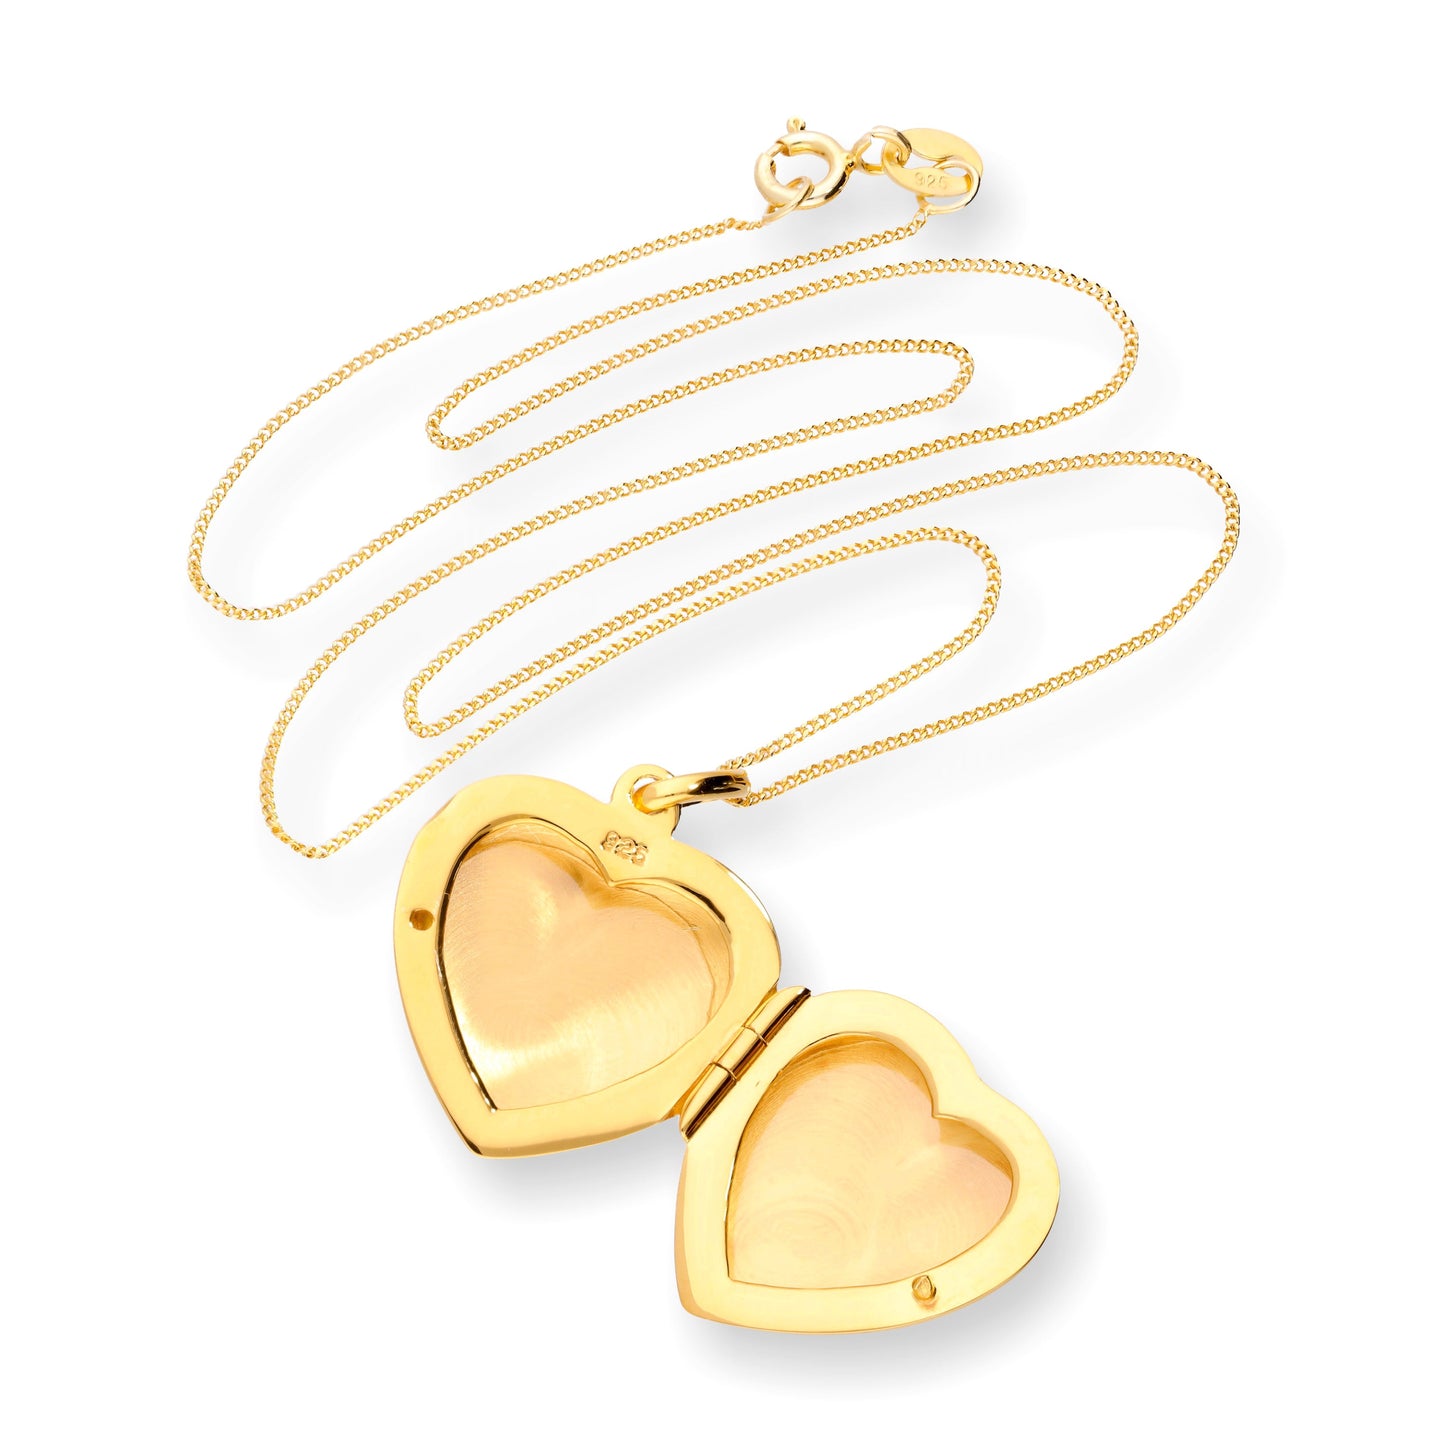 Gold Plated Sterling Silver Engravable Heart Locket on Chain 16 - 22 Inches